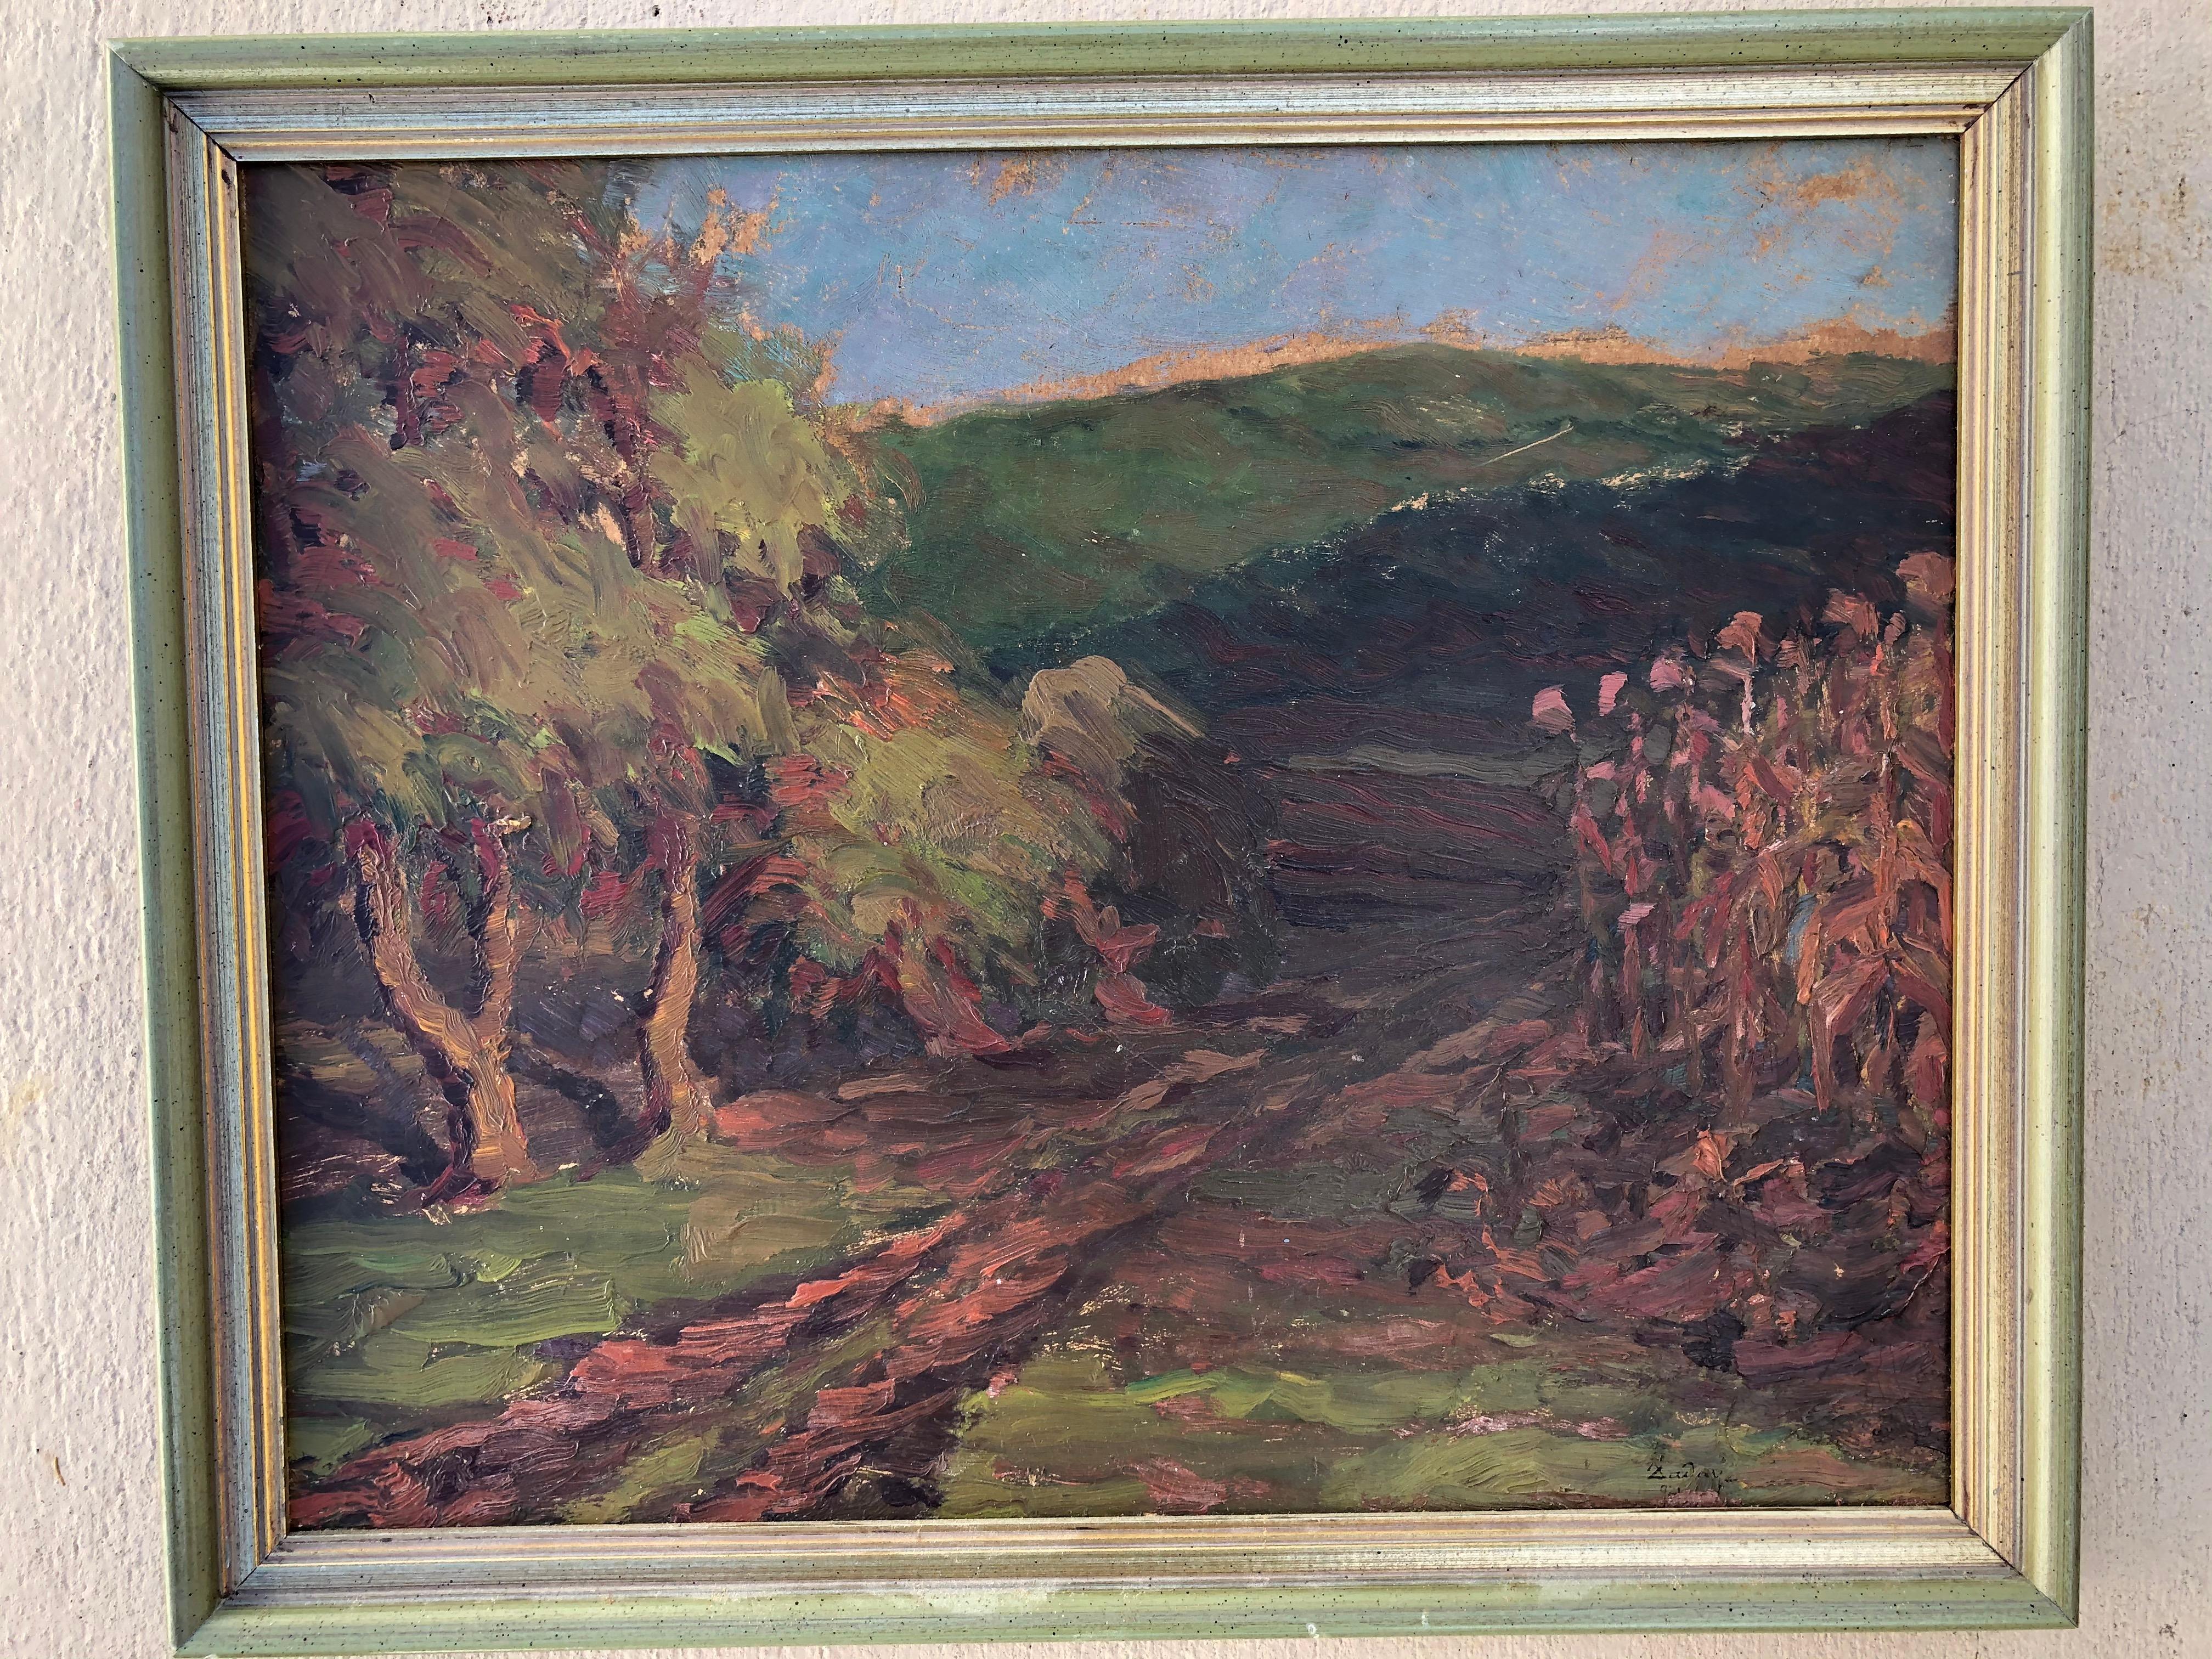 Mystery Signed Impressionistic Landscape - Painting by Unknown